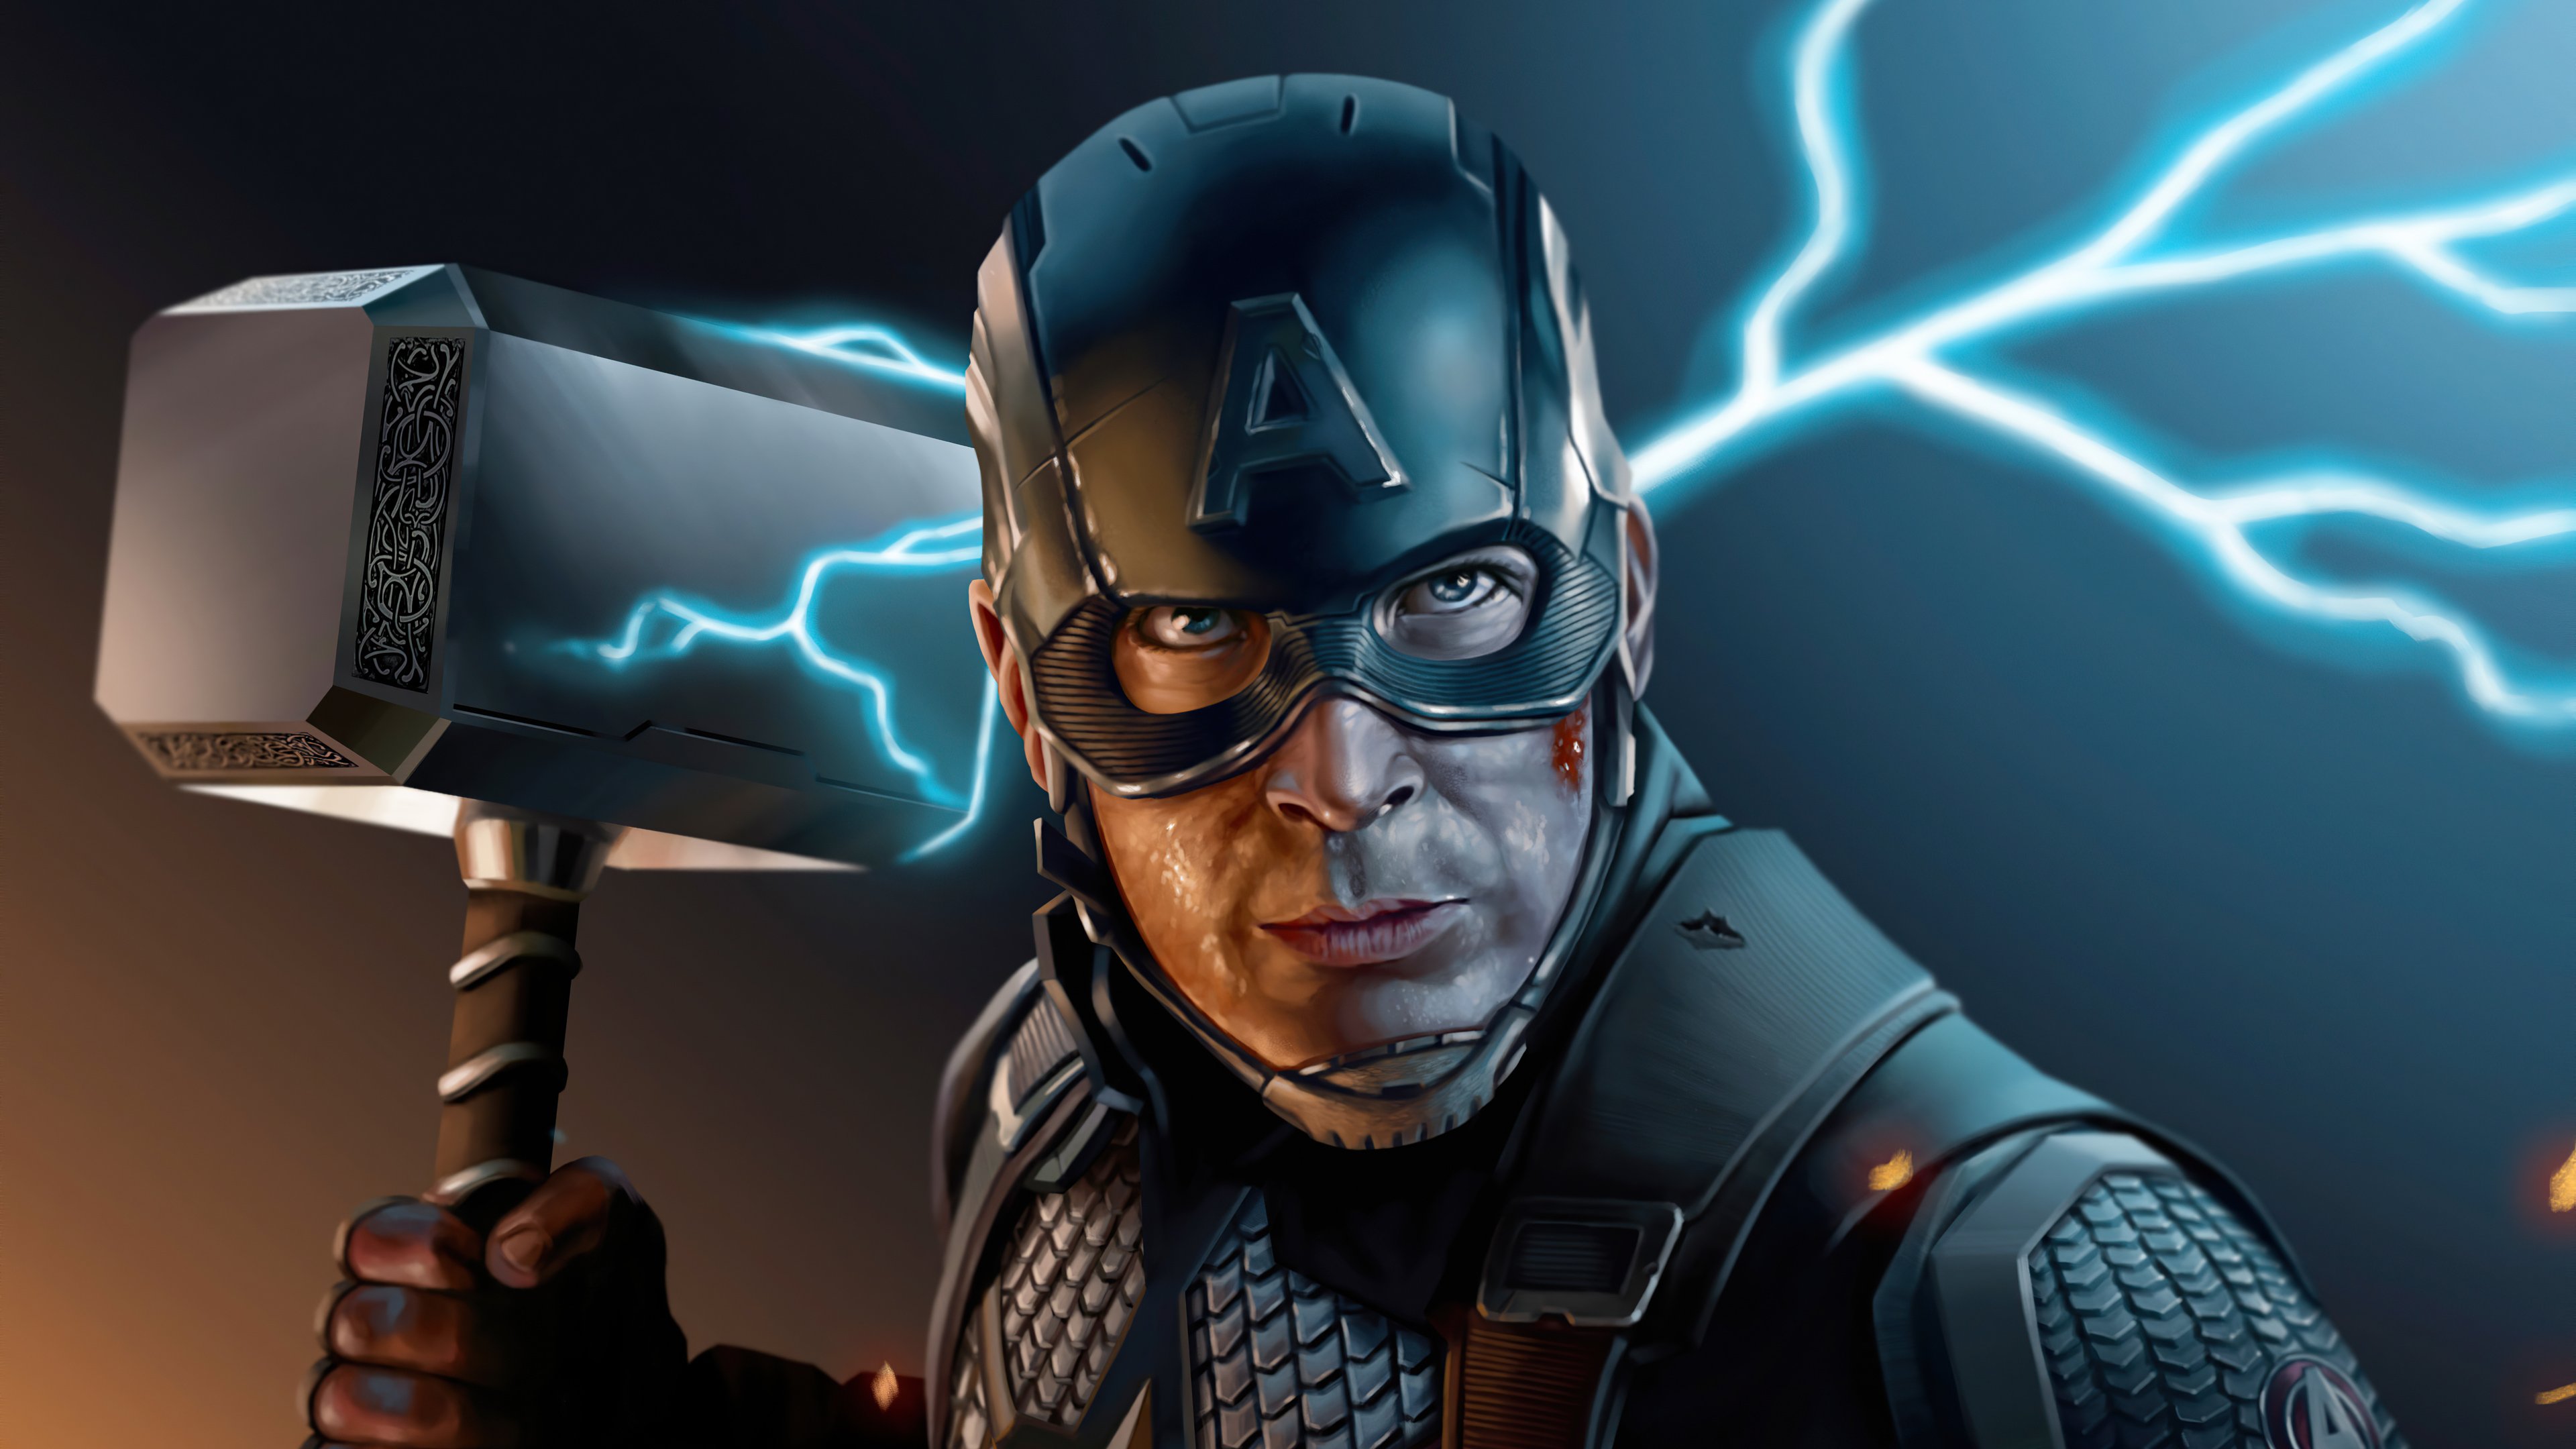 Wallpaper Captain America with Thor's hammer